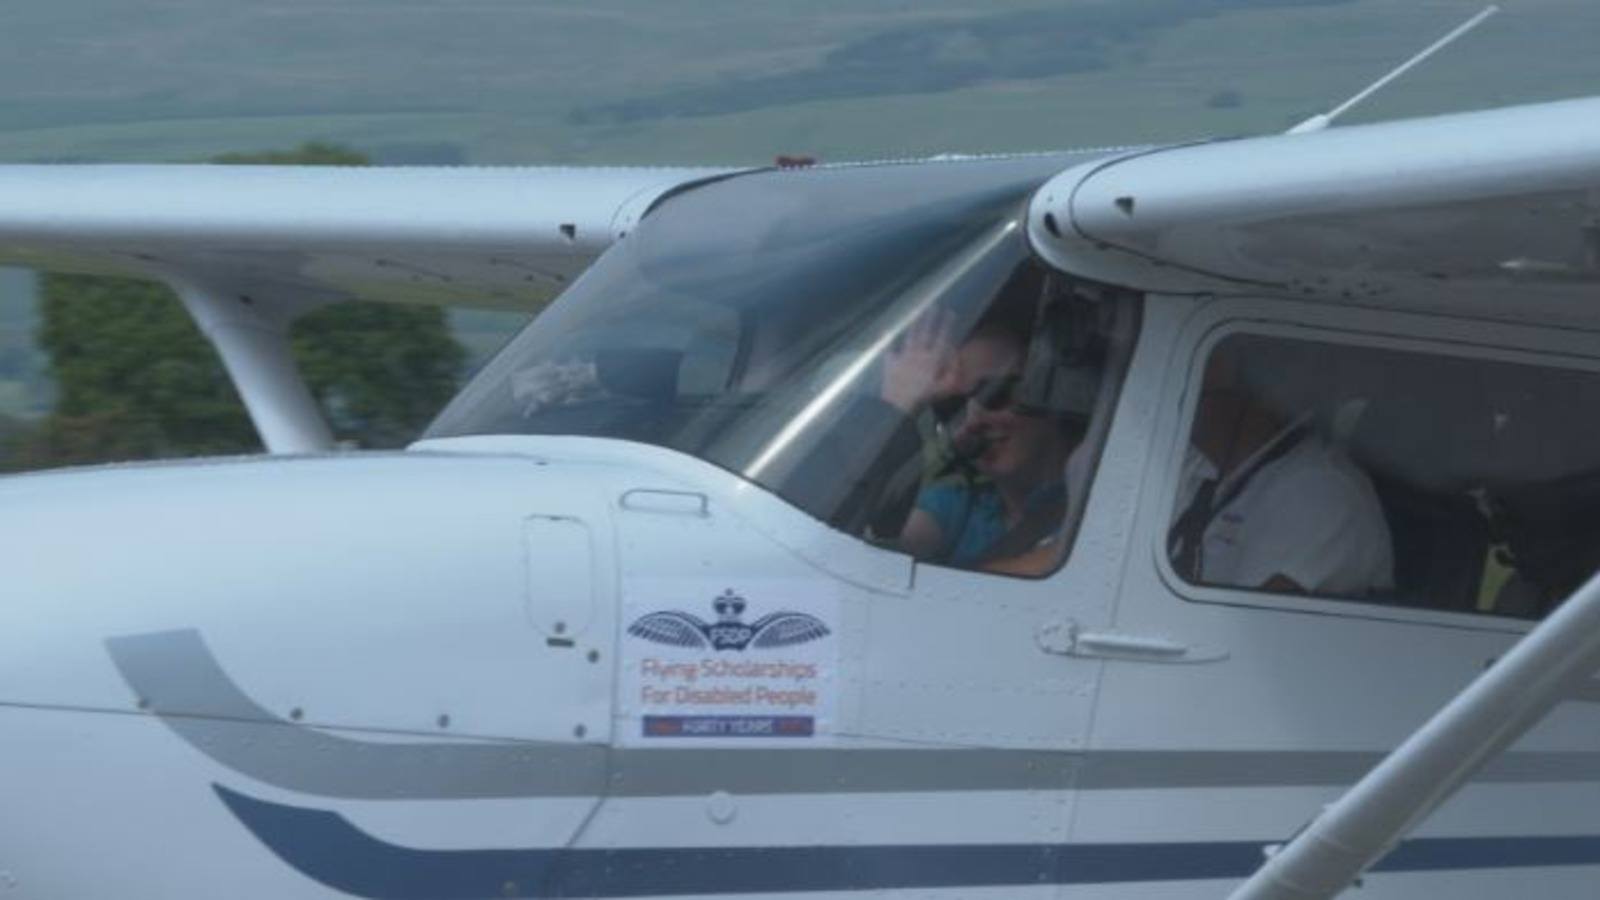 Pauline Gallagher started flying in 2005, after receiving a scholarship from the charity